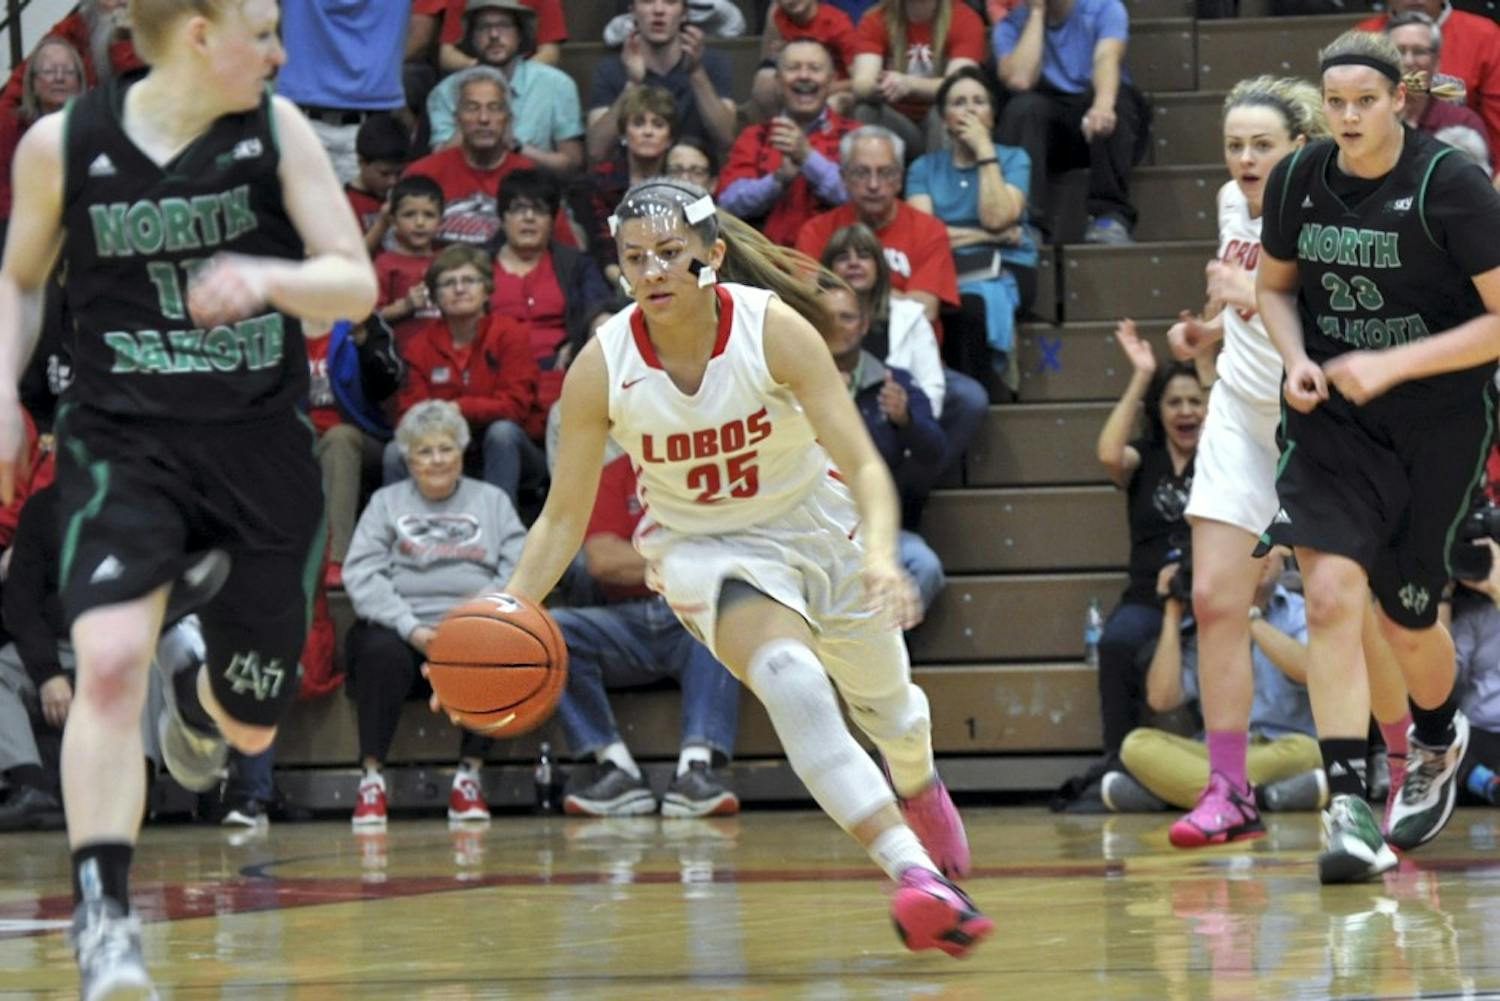 New Mexico freshman guard Laneah Bryan dribbles the ball down the court during the Womens Basketball Invitational opener against North Dakota Wednesday evening at Johnson Center. The Lobos won 54-51.
